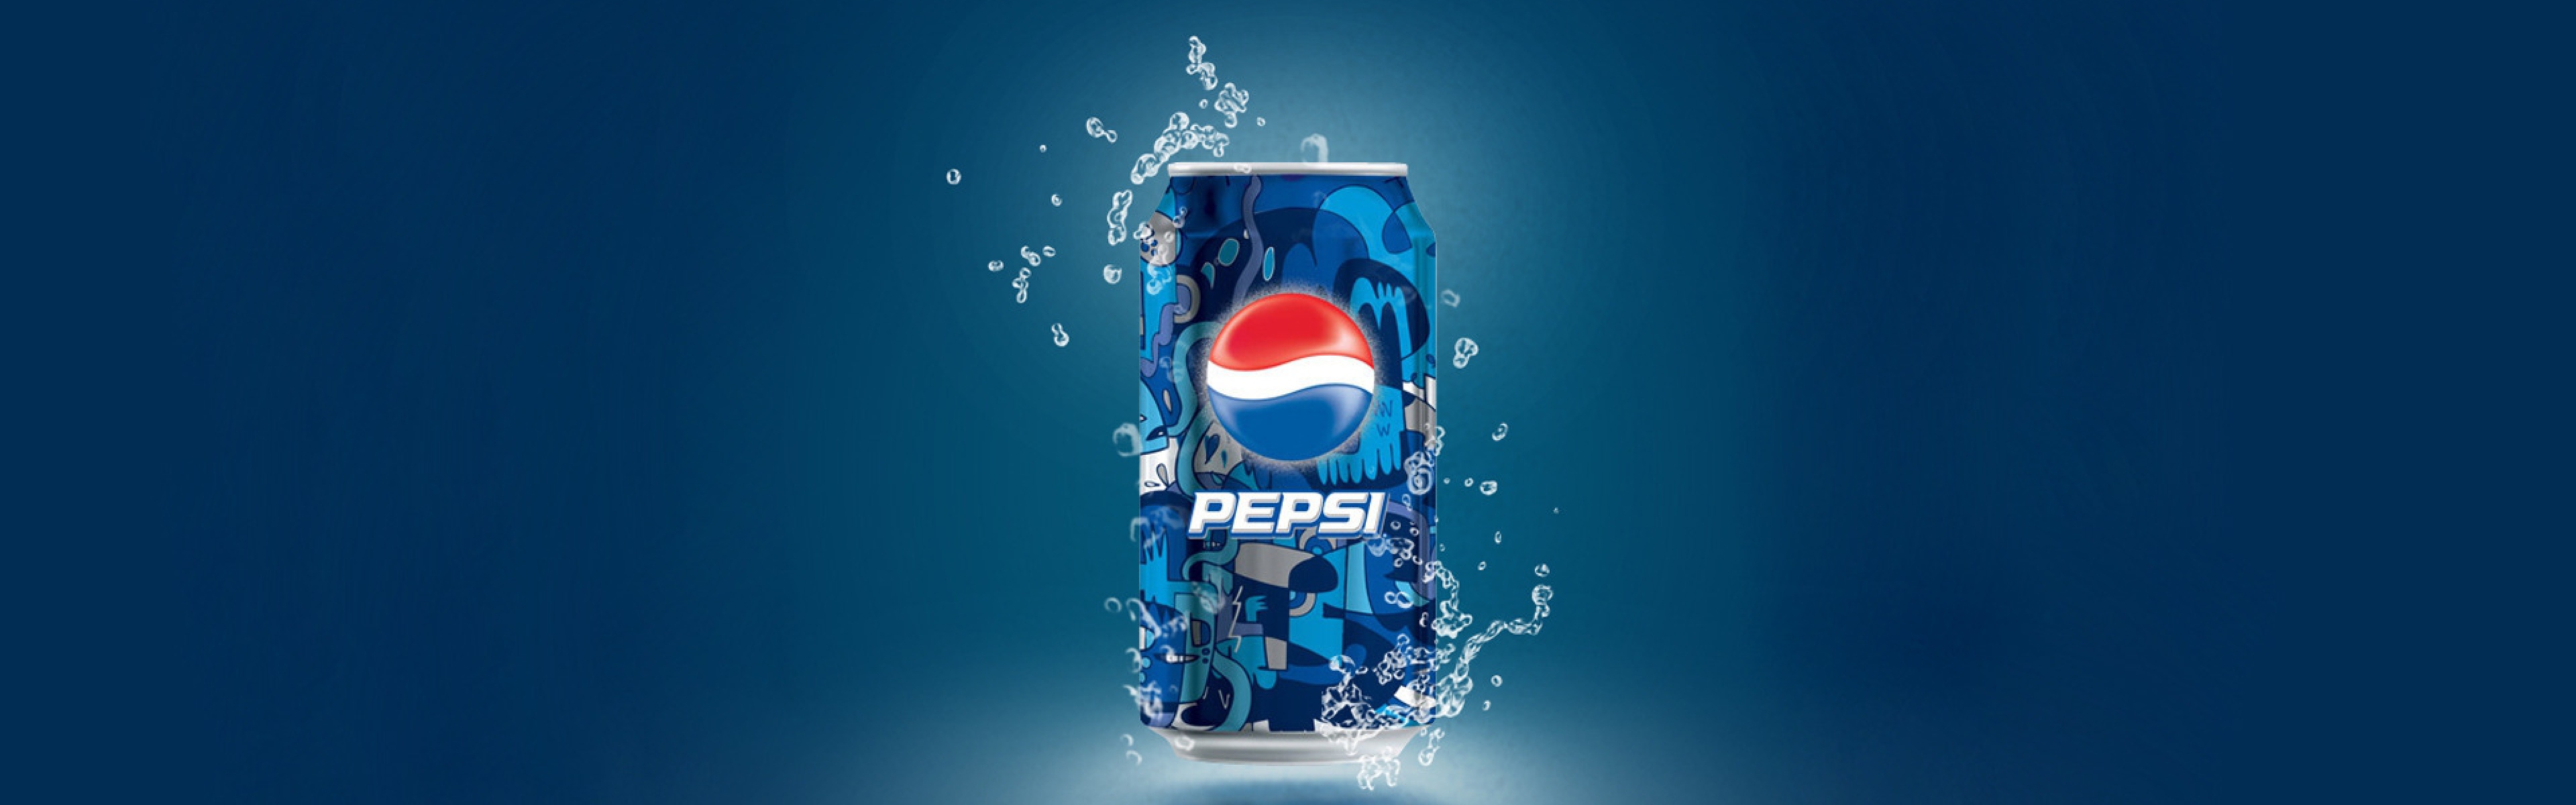 Pepsi Wallpaper For Full HD Pictures